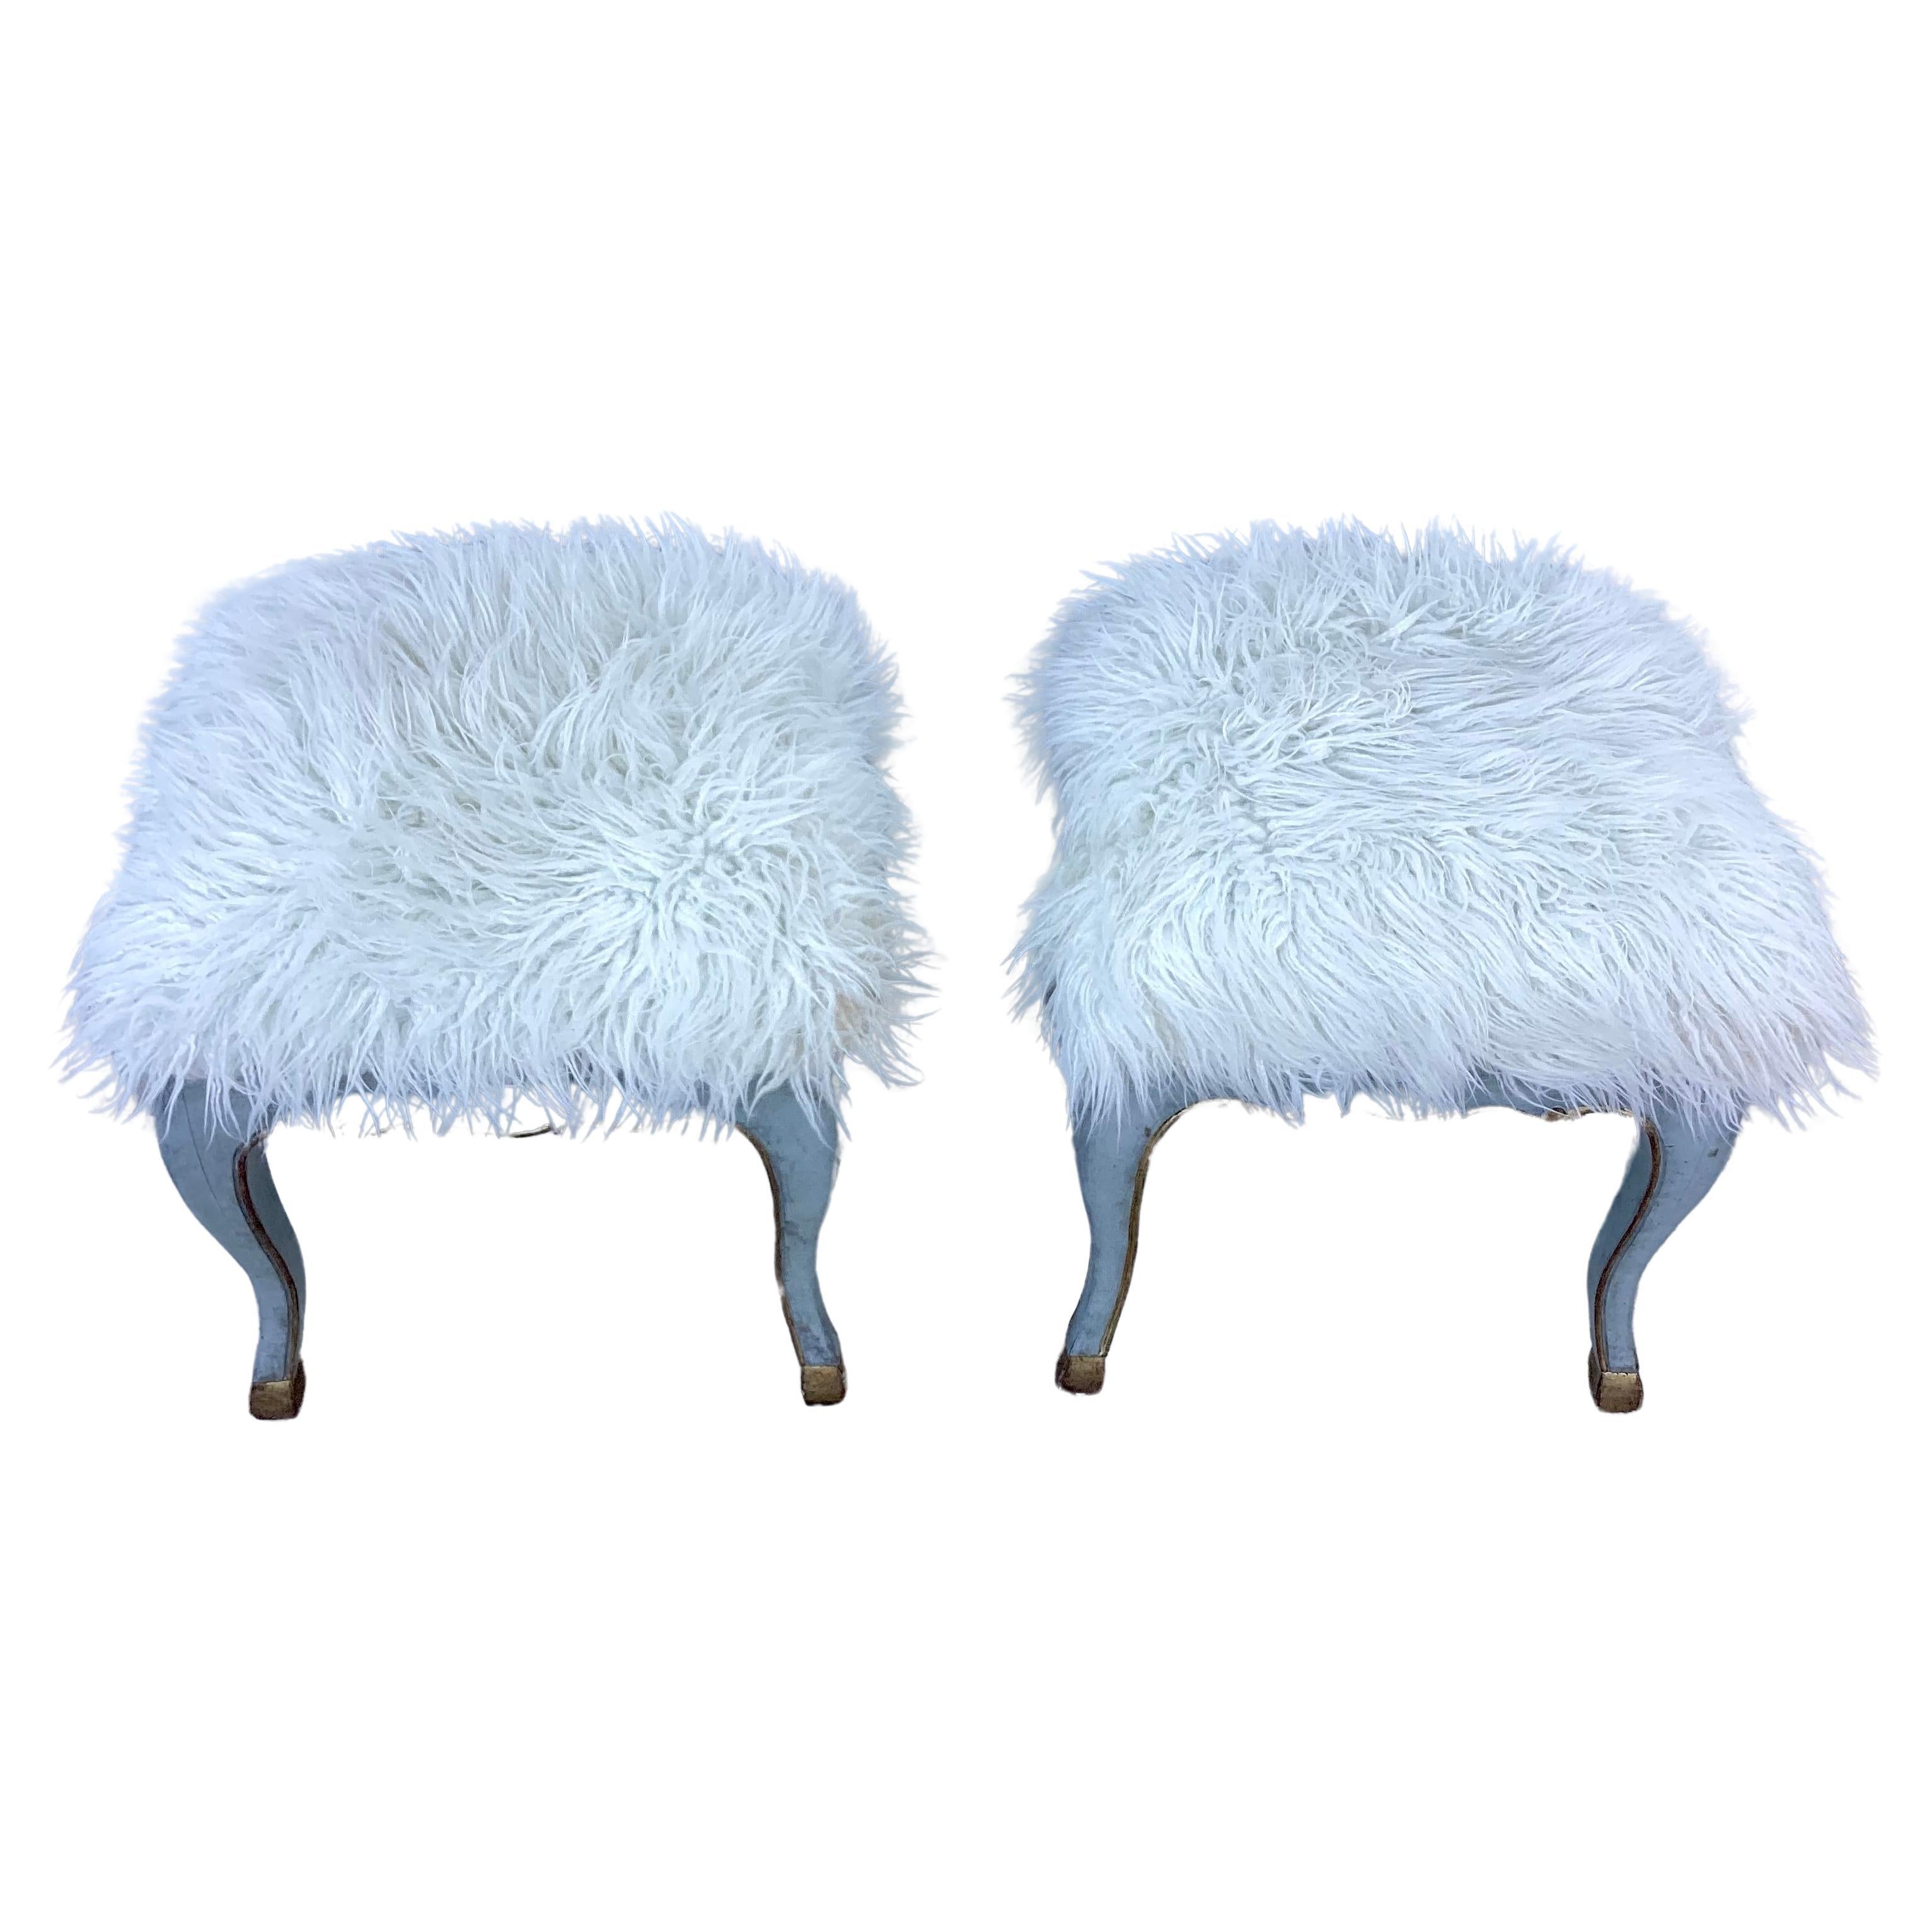 Pair of mid-century modern Italian Rococo stools with faux sheepskin seats. Base is made of wood painted in a light blue with gold trim with gilt feet on cabriole legs. Thick white faux sheepskin sits atop of each stool. Add a touch of glamour to